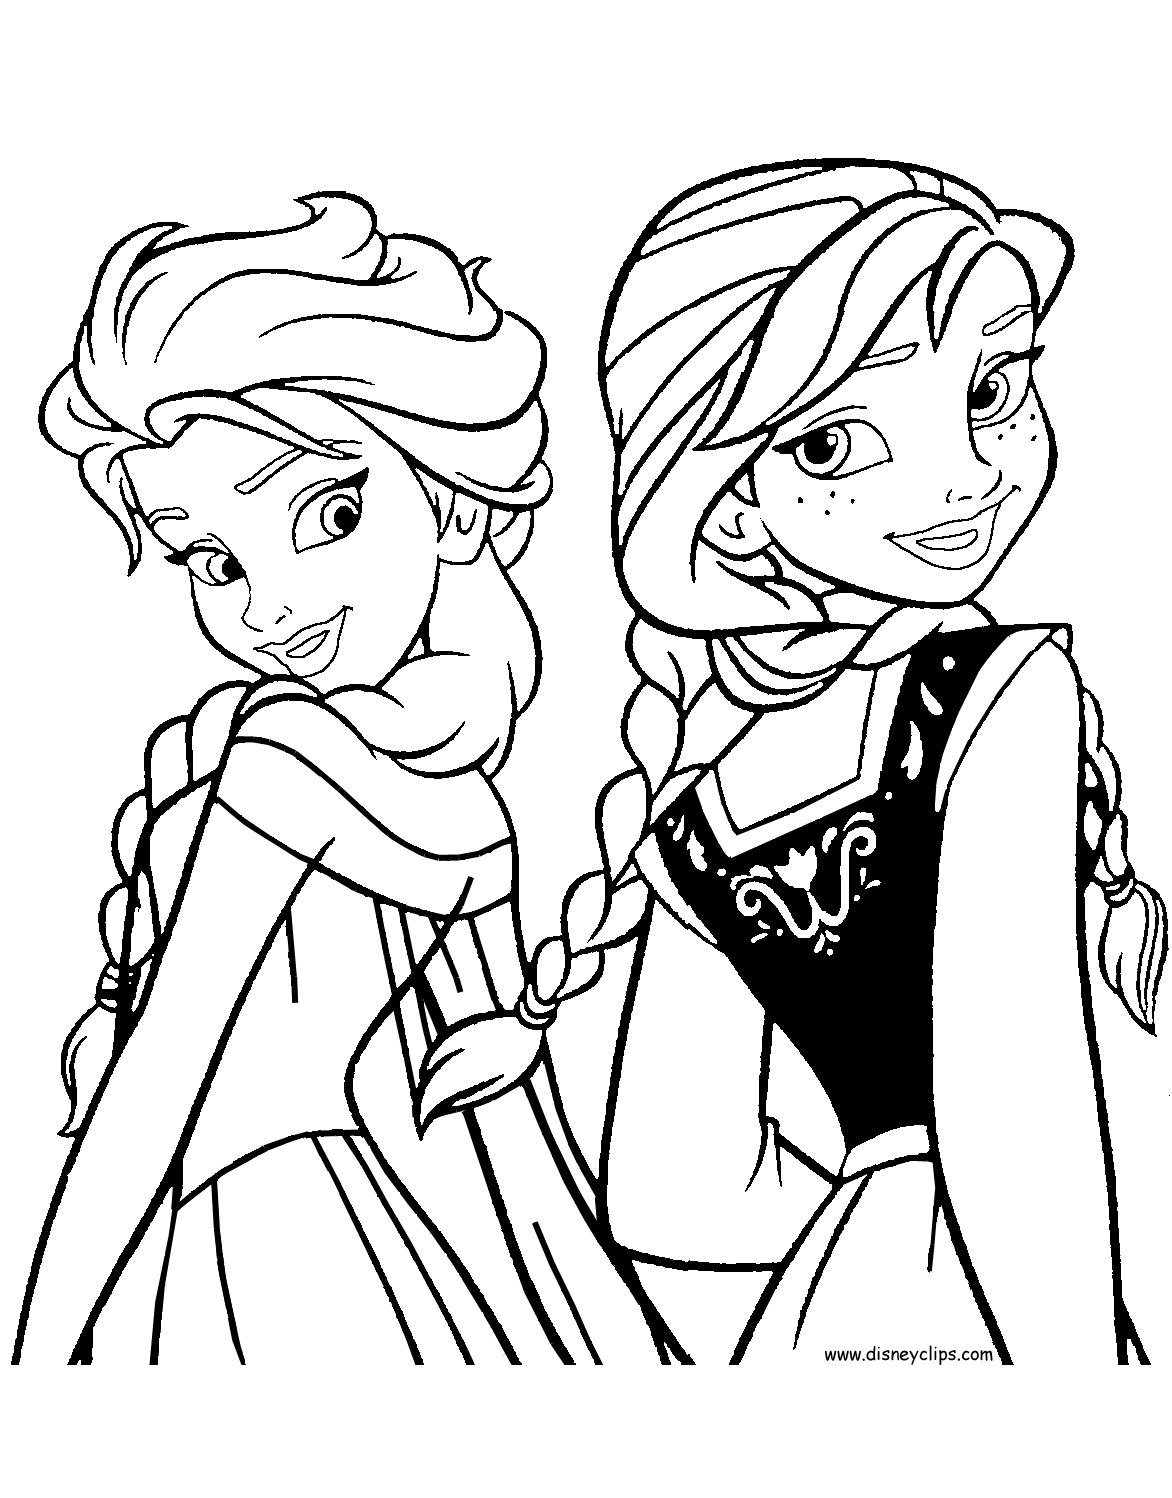 Disney Frozen Printable Coloring Pages At Getdrawings | Free Download